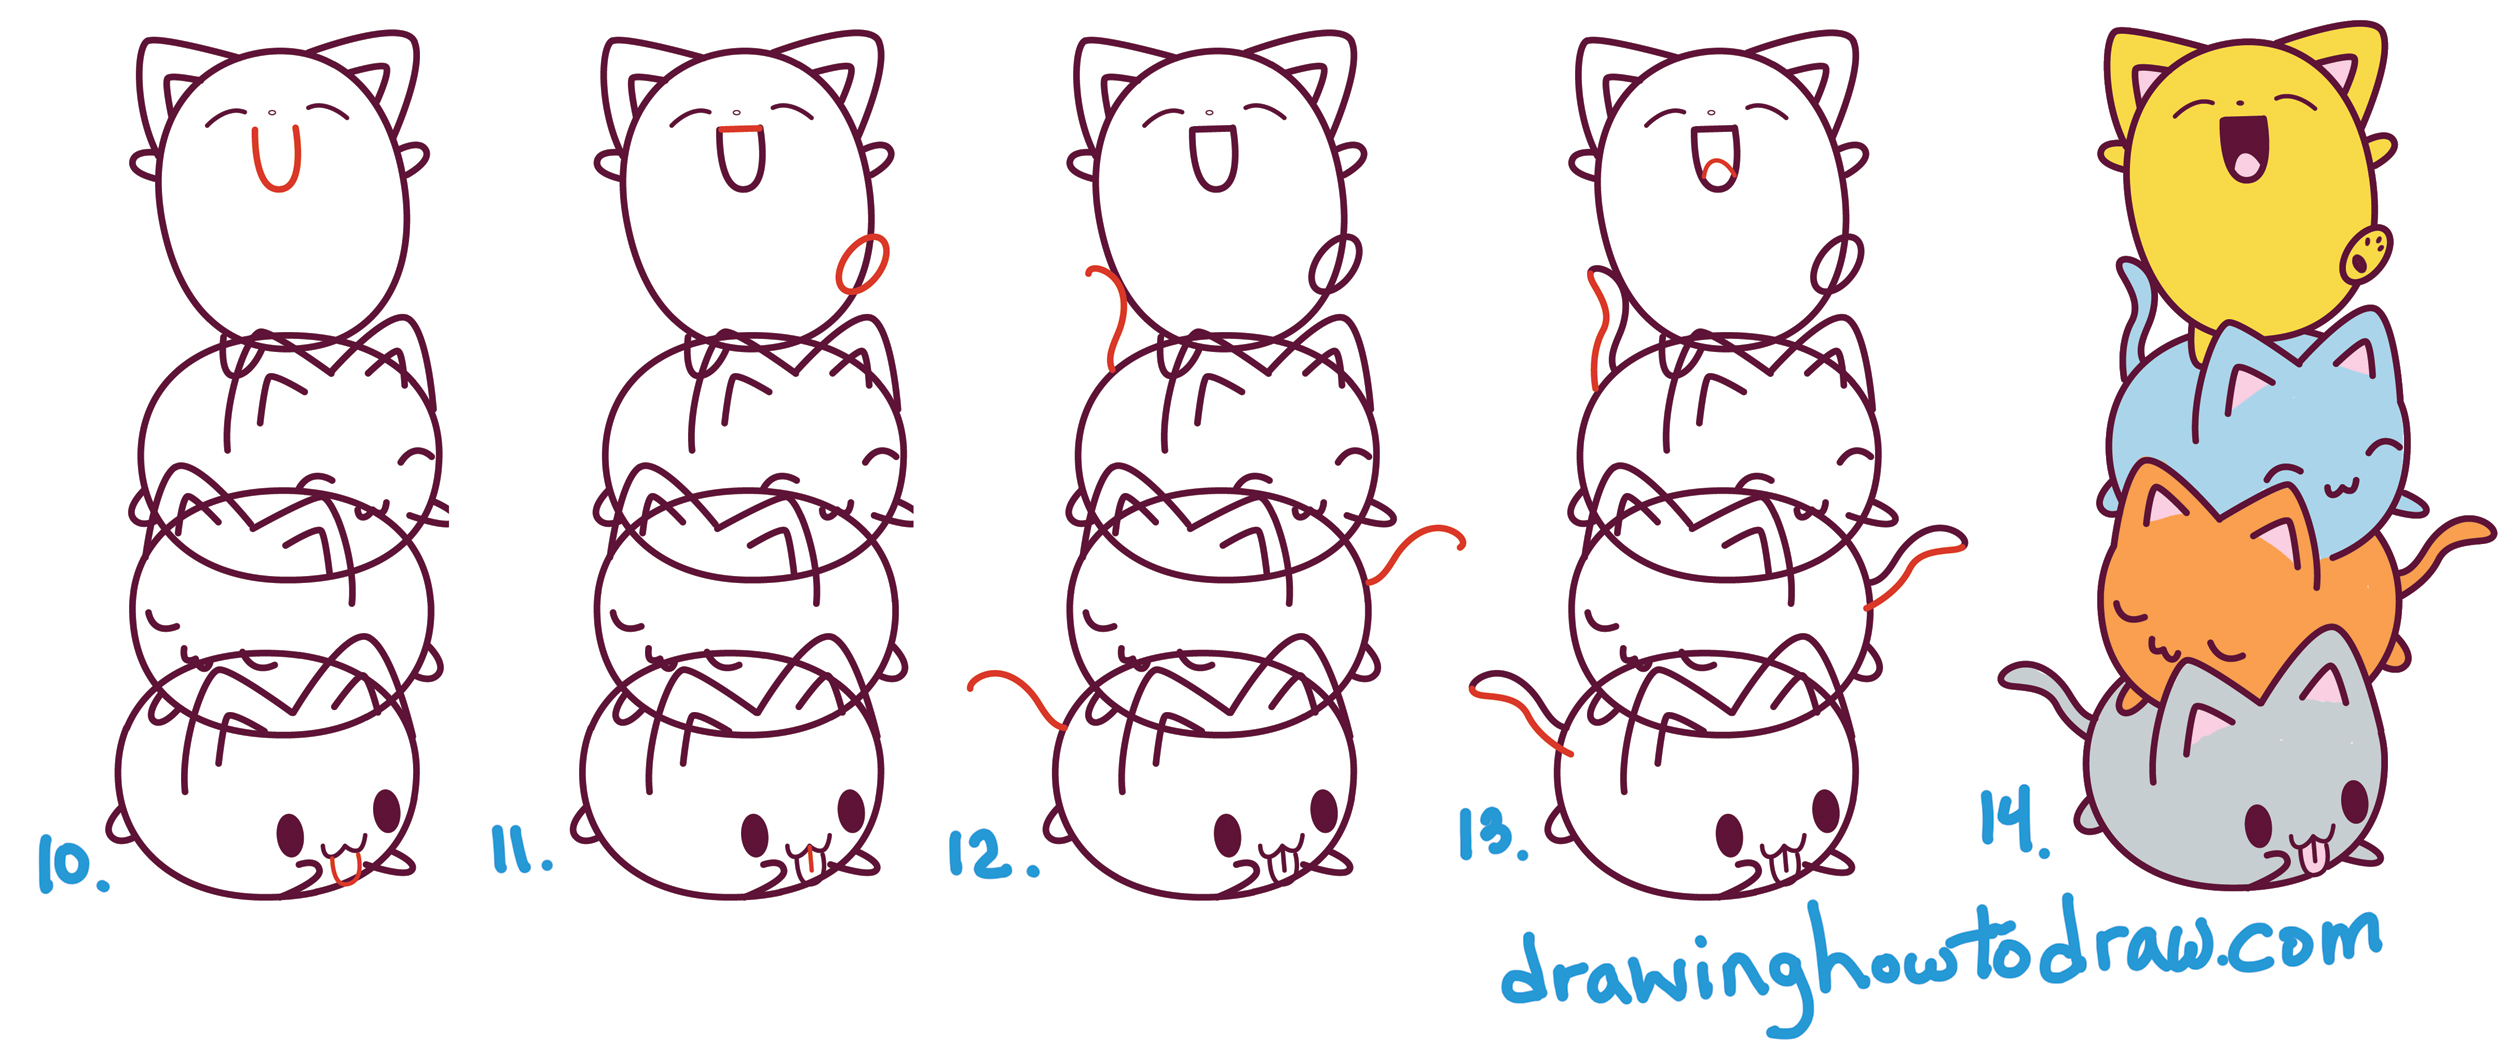 How to Draw Cute Kawaii Cats Stacked on Top of Each Other - Easy Step